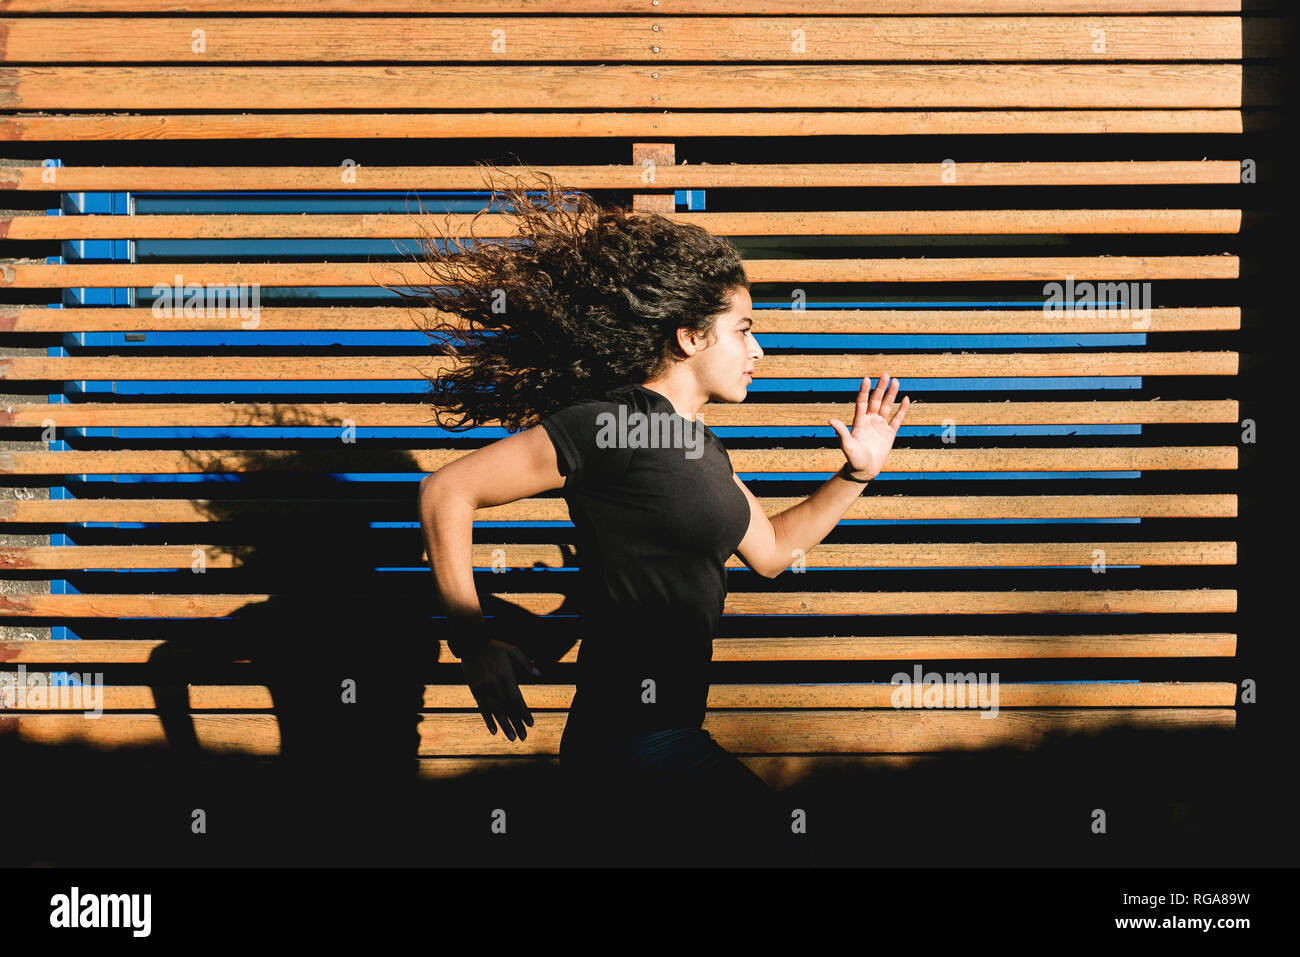 Sportive young woman running along wood paneling Stock Photo